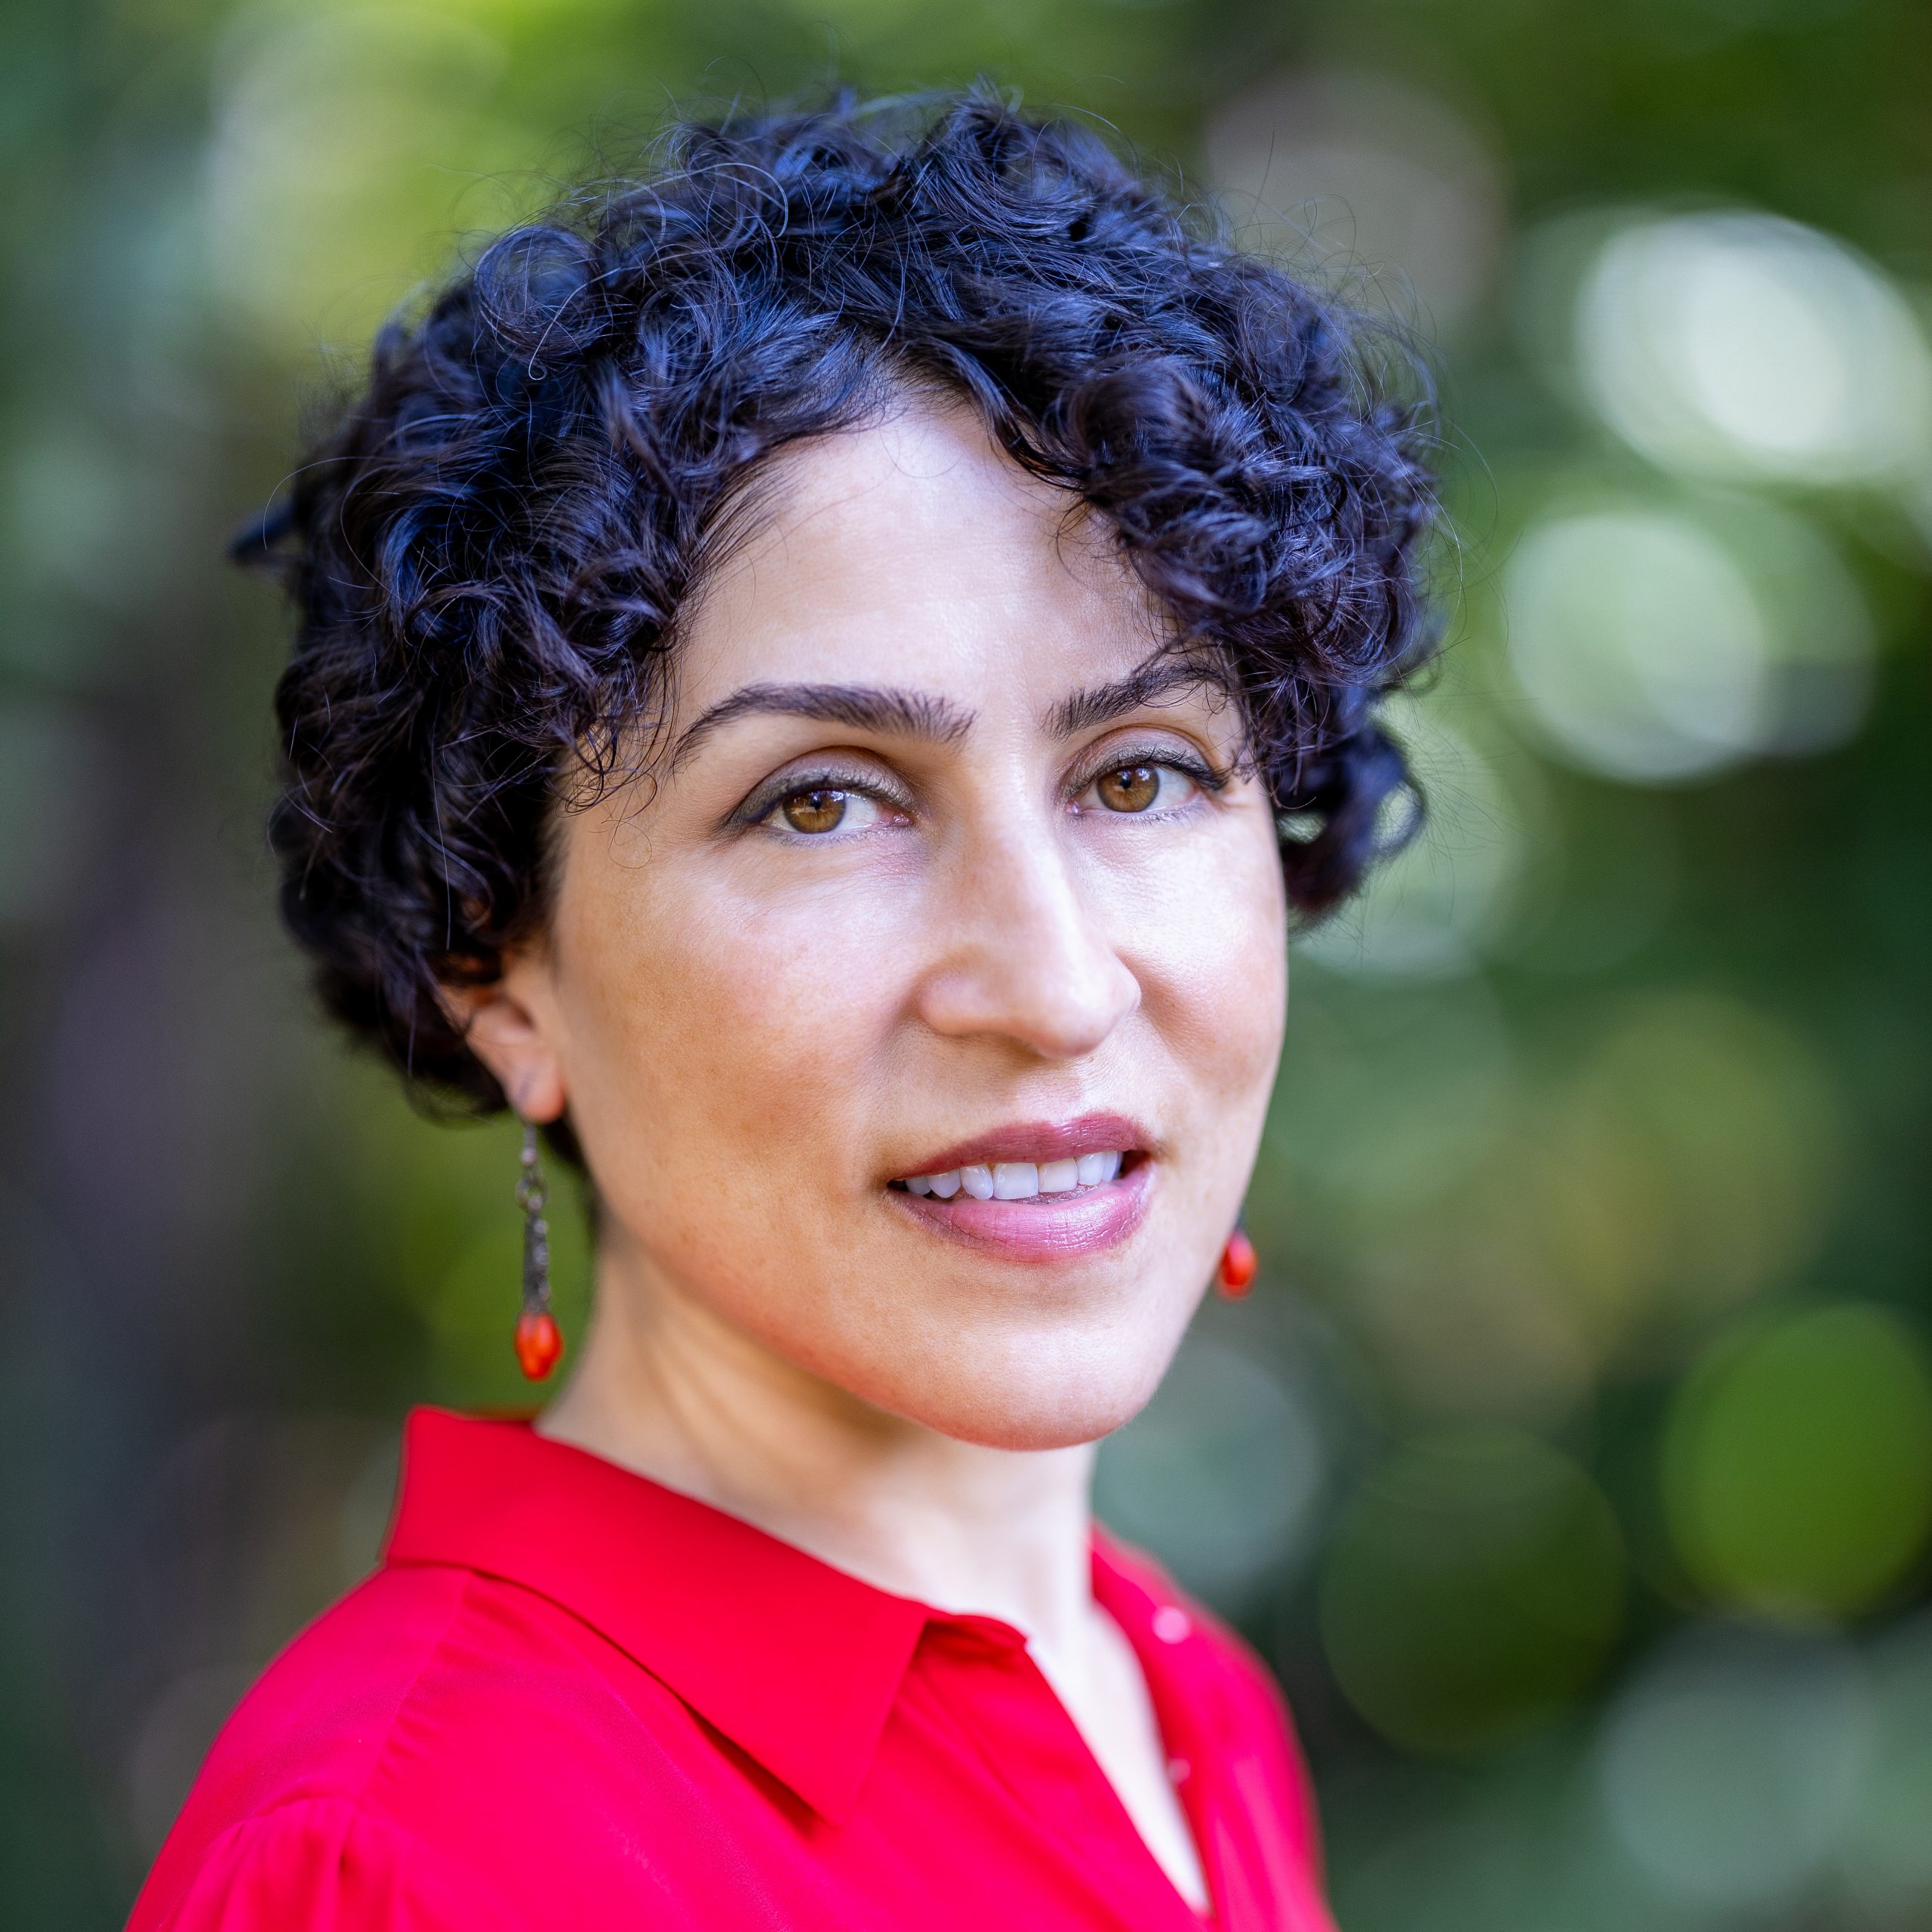 Headshot of Azadeh Shahshahani, legal and advocacy director of Project South